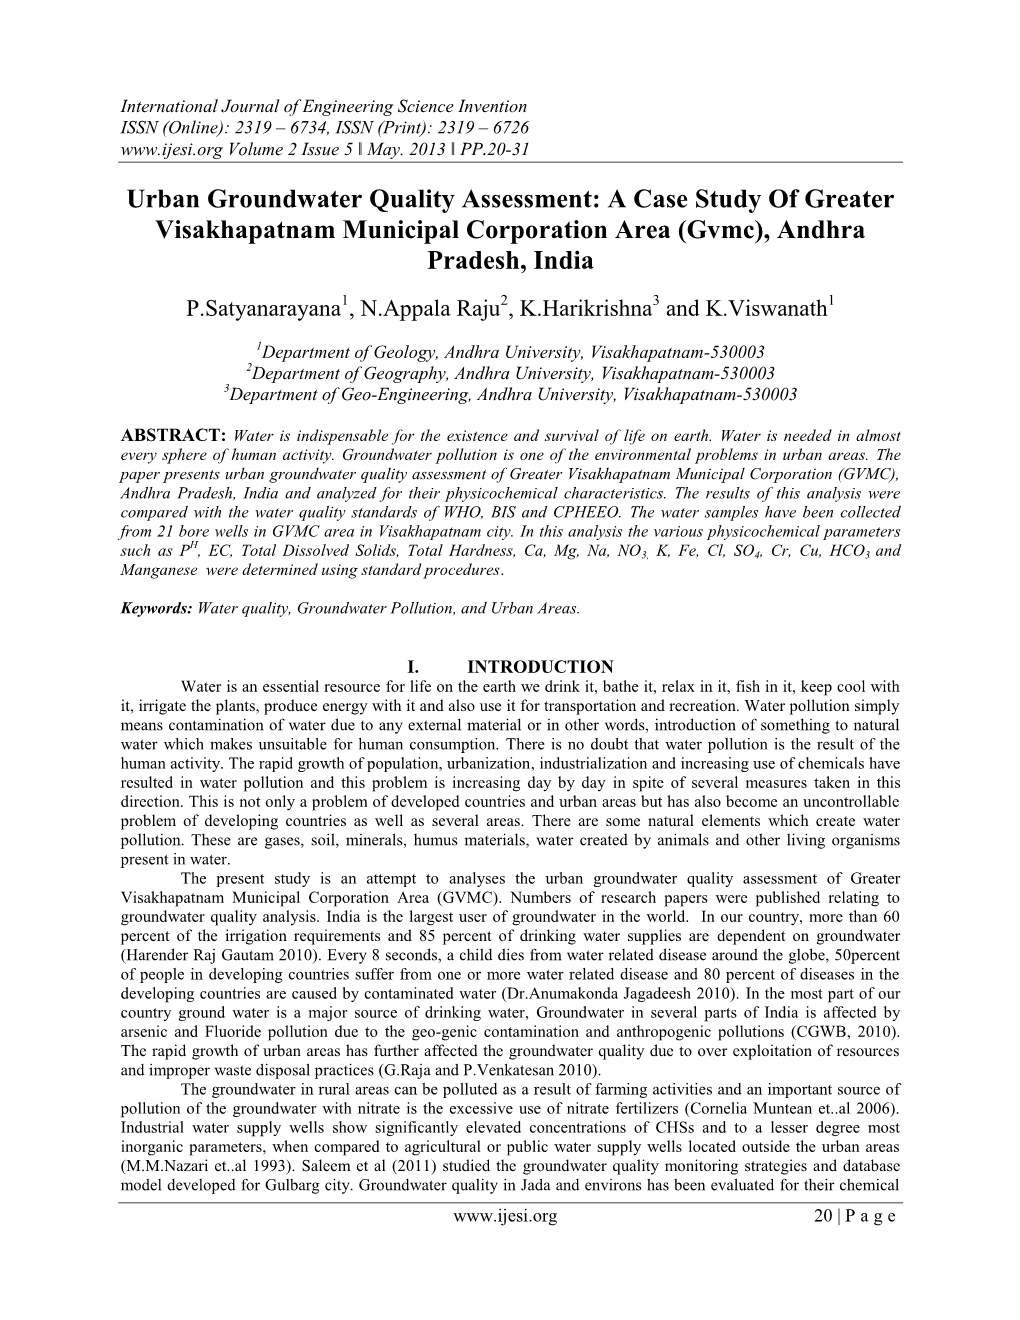 Urban Groundwater Quality Assessment: a Case Study of Greater Visakhapatnam Municipal Corporation Area (Gvmc), Andhra Pradesh, I